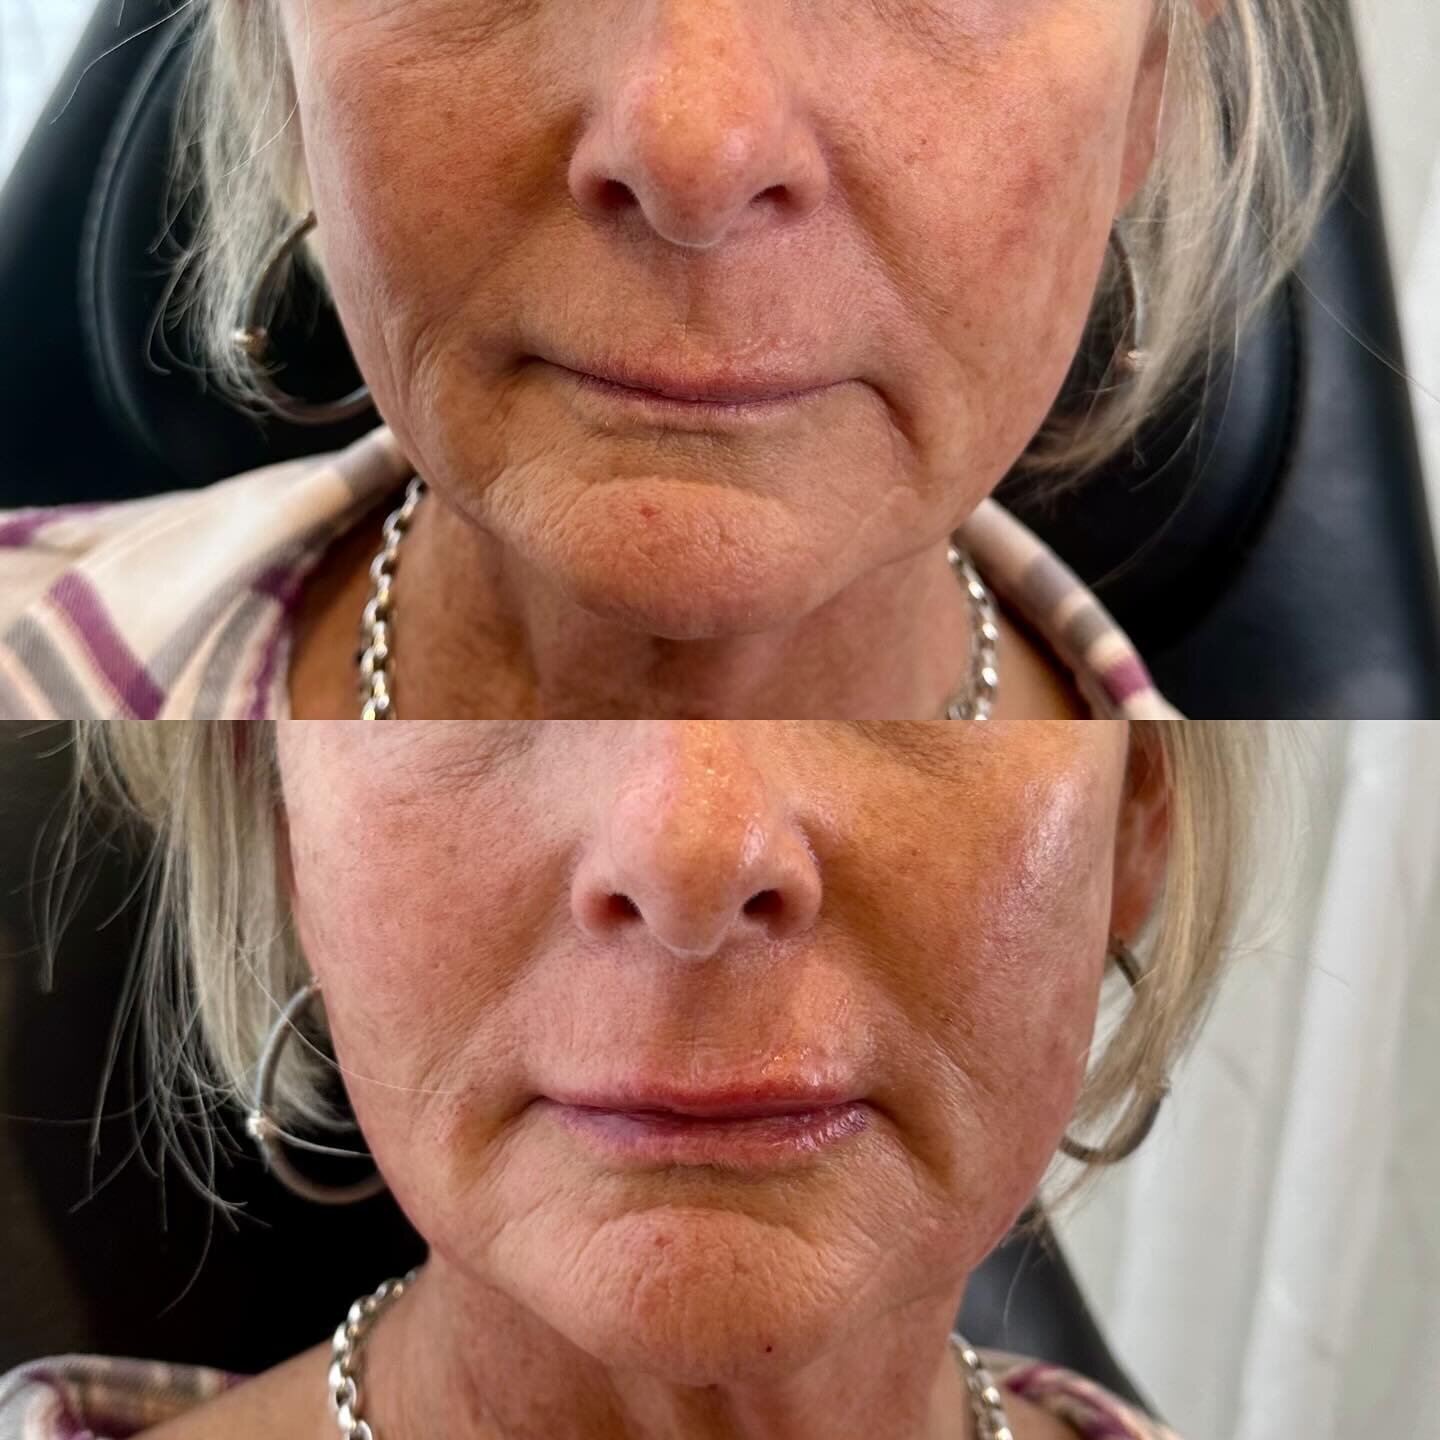 A little Restylene went a long way for her cheeks and jawline and gave this client nice refreshed look.
Redensity was used to give her a soft, natural lip.

Want to freshen up your look?
Book a complimentary consultation to see what treatment might b